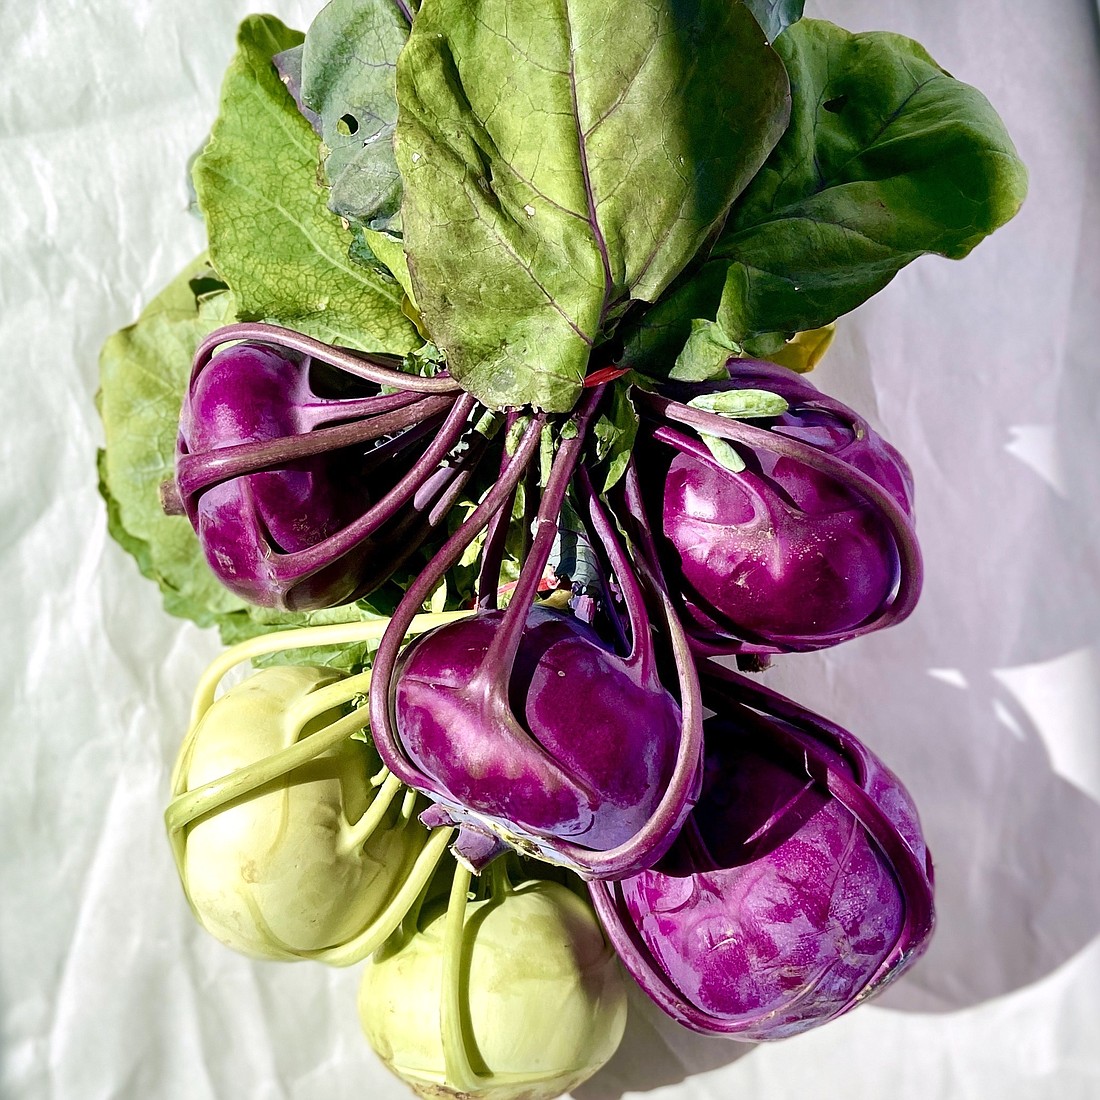 With its spiny skin and twisting stems, kohlrabi looks like it would take a lot of work to cook. But the brassica is surprisingly simple to prepare, and the payoff is many times over.